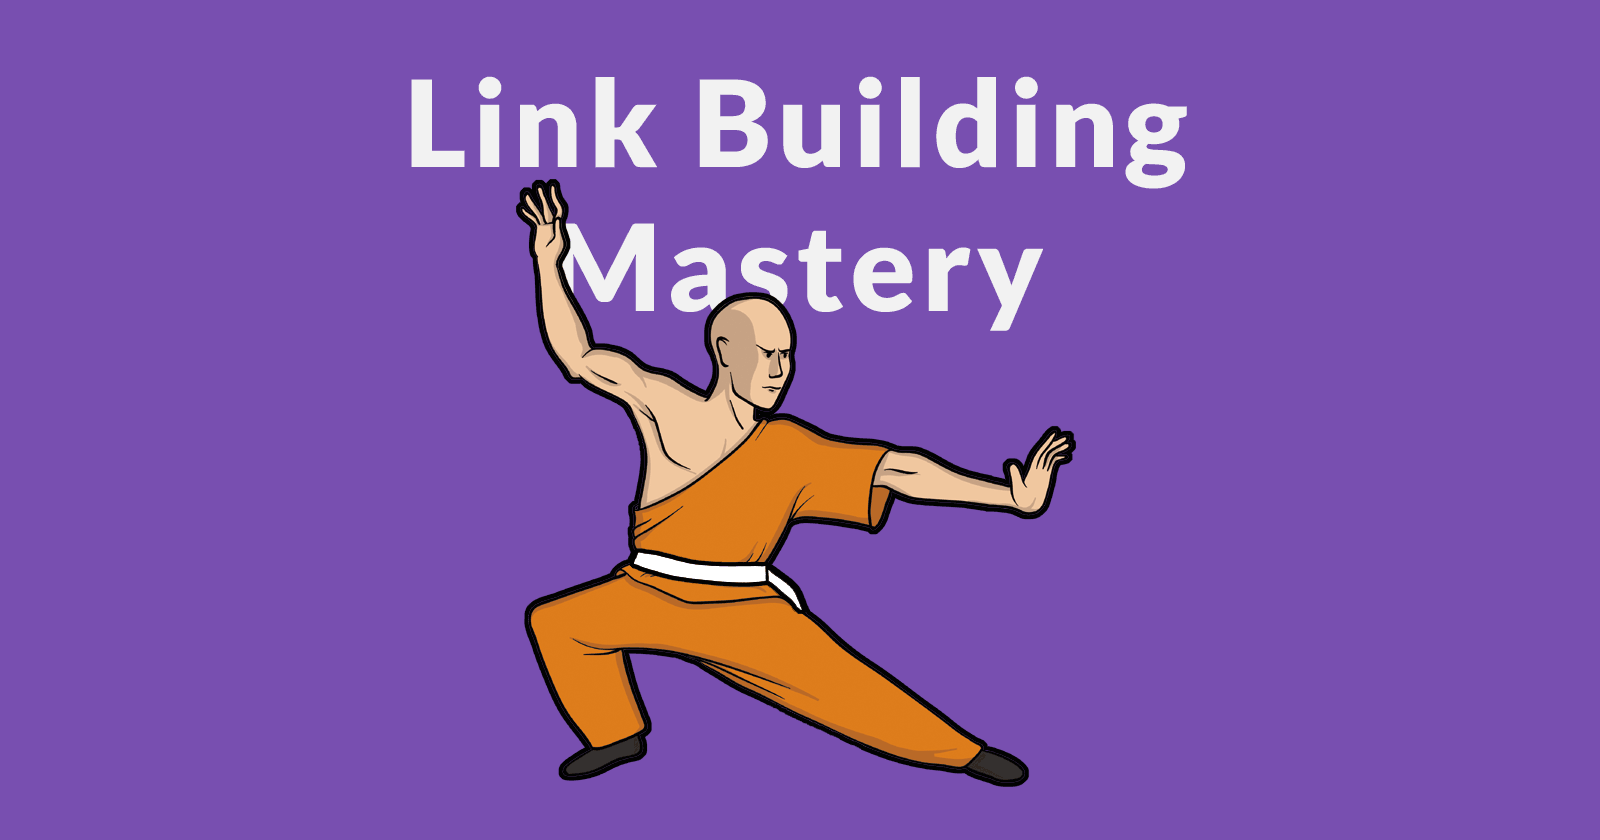 Image of a kung fu master, a metaphor for becoming a master at building links to websites